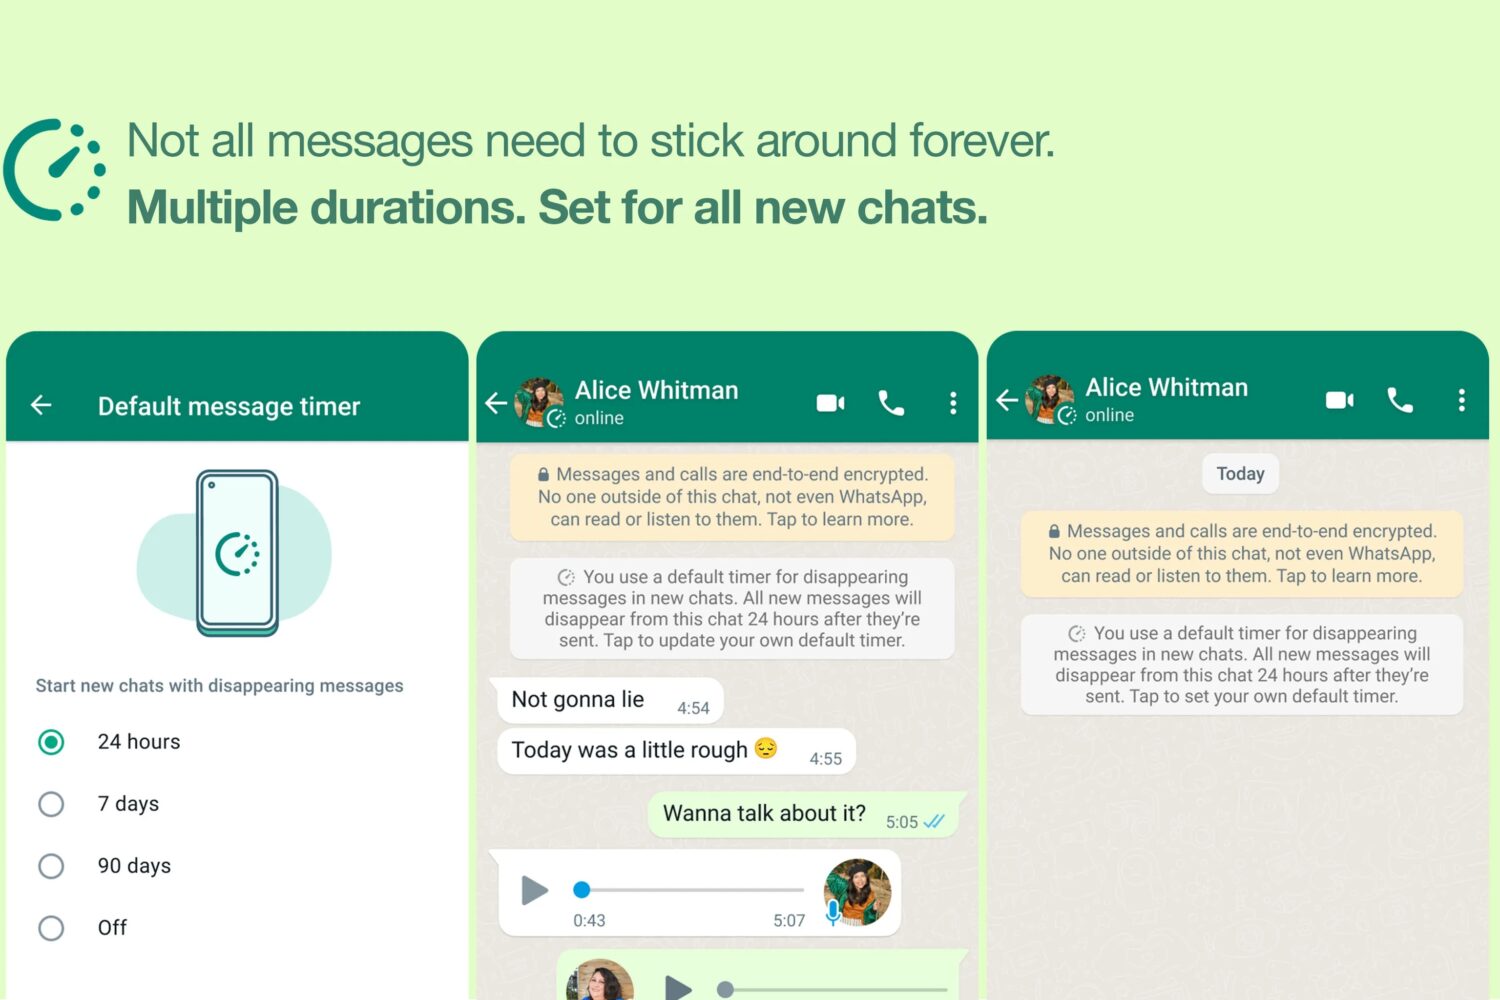 Marketing image showing the main features of WhatsApp's disappearing messages with multiple durations